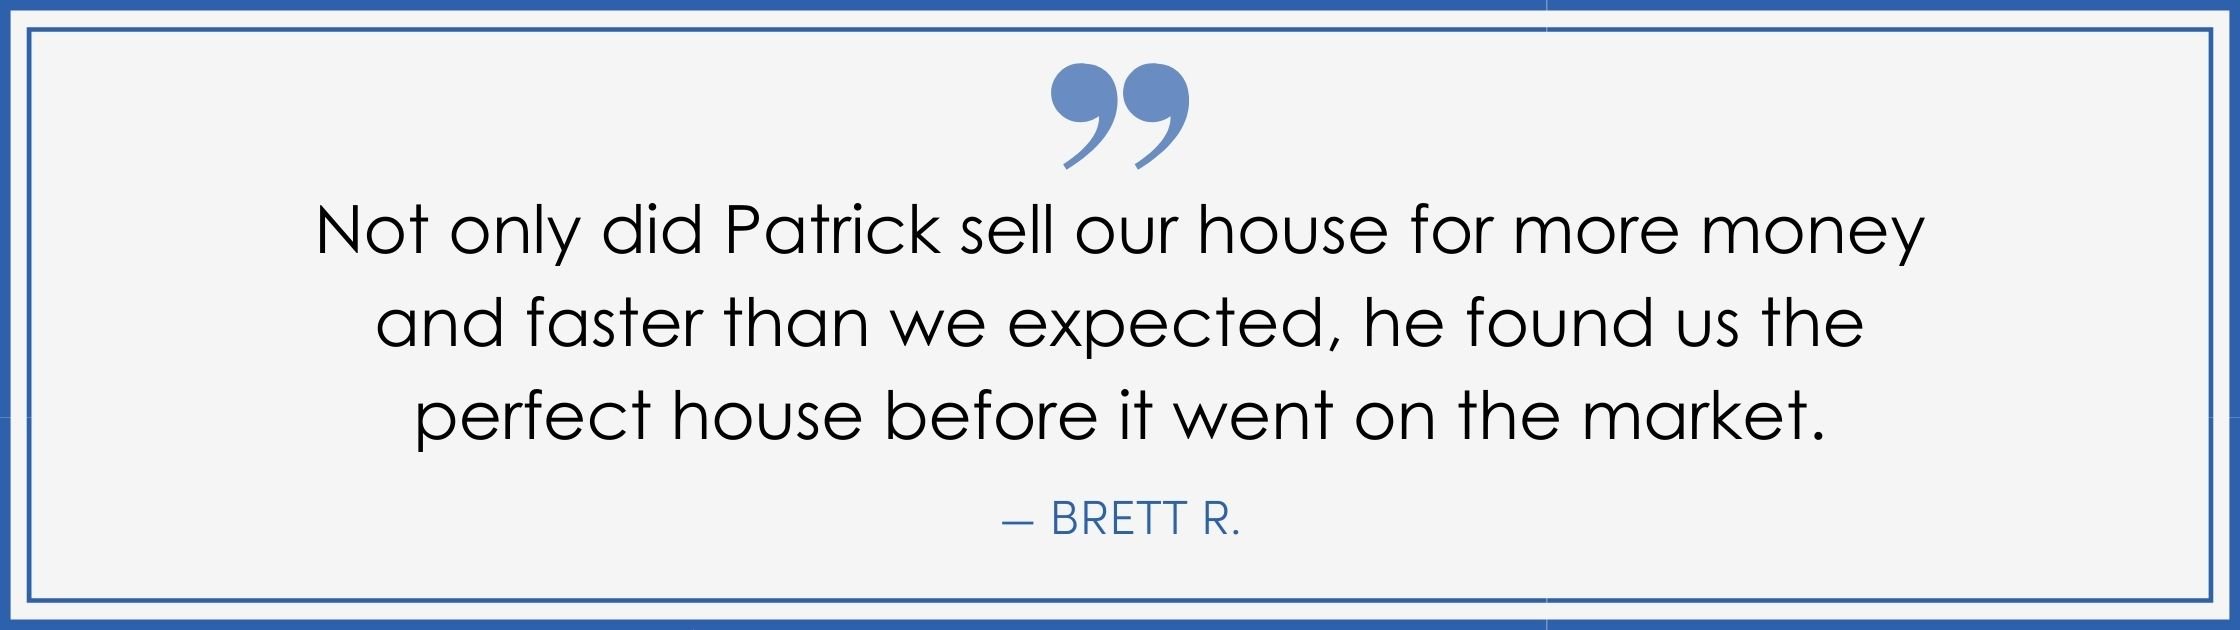 “Not only did Patrick sell our house for more money and faster than we expected, he found us the perfect house before it went on the market.” –Brett R. (Copy) (Copy)